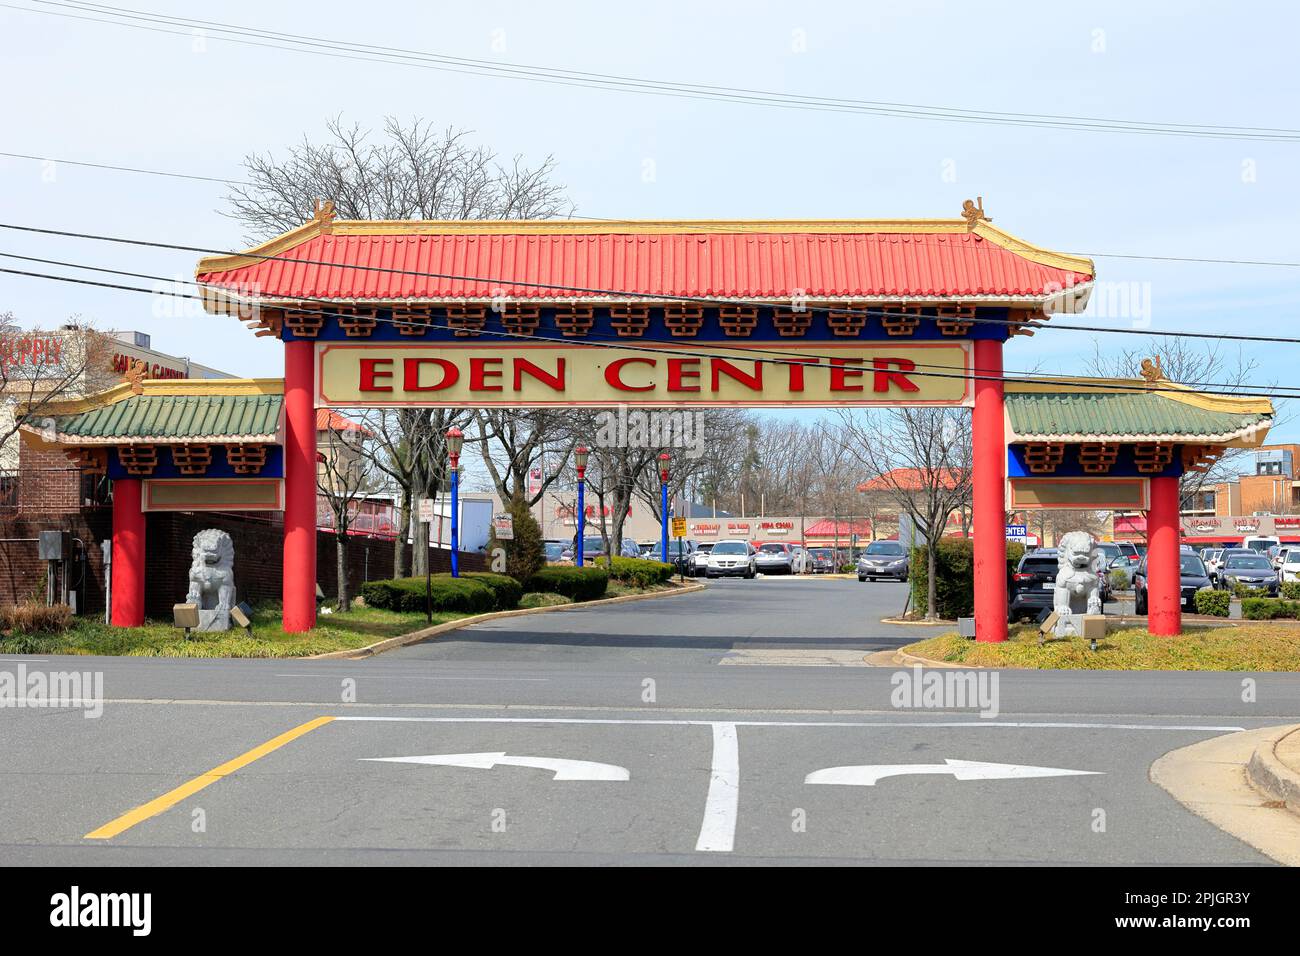 Archway over Eden Center shopping mall in Falls Church, Virginia. The shopping center features many Vietnamese owned business and restaurants. Stock Photo